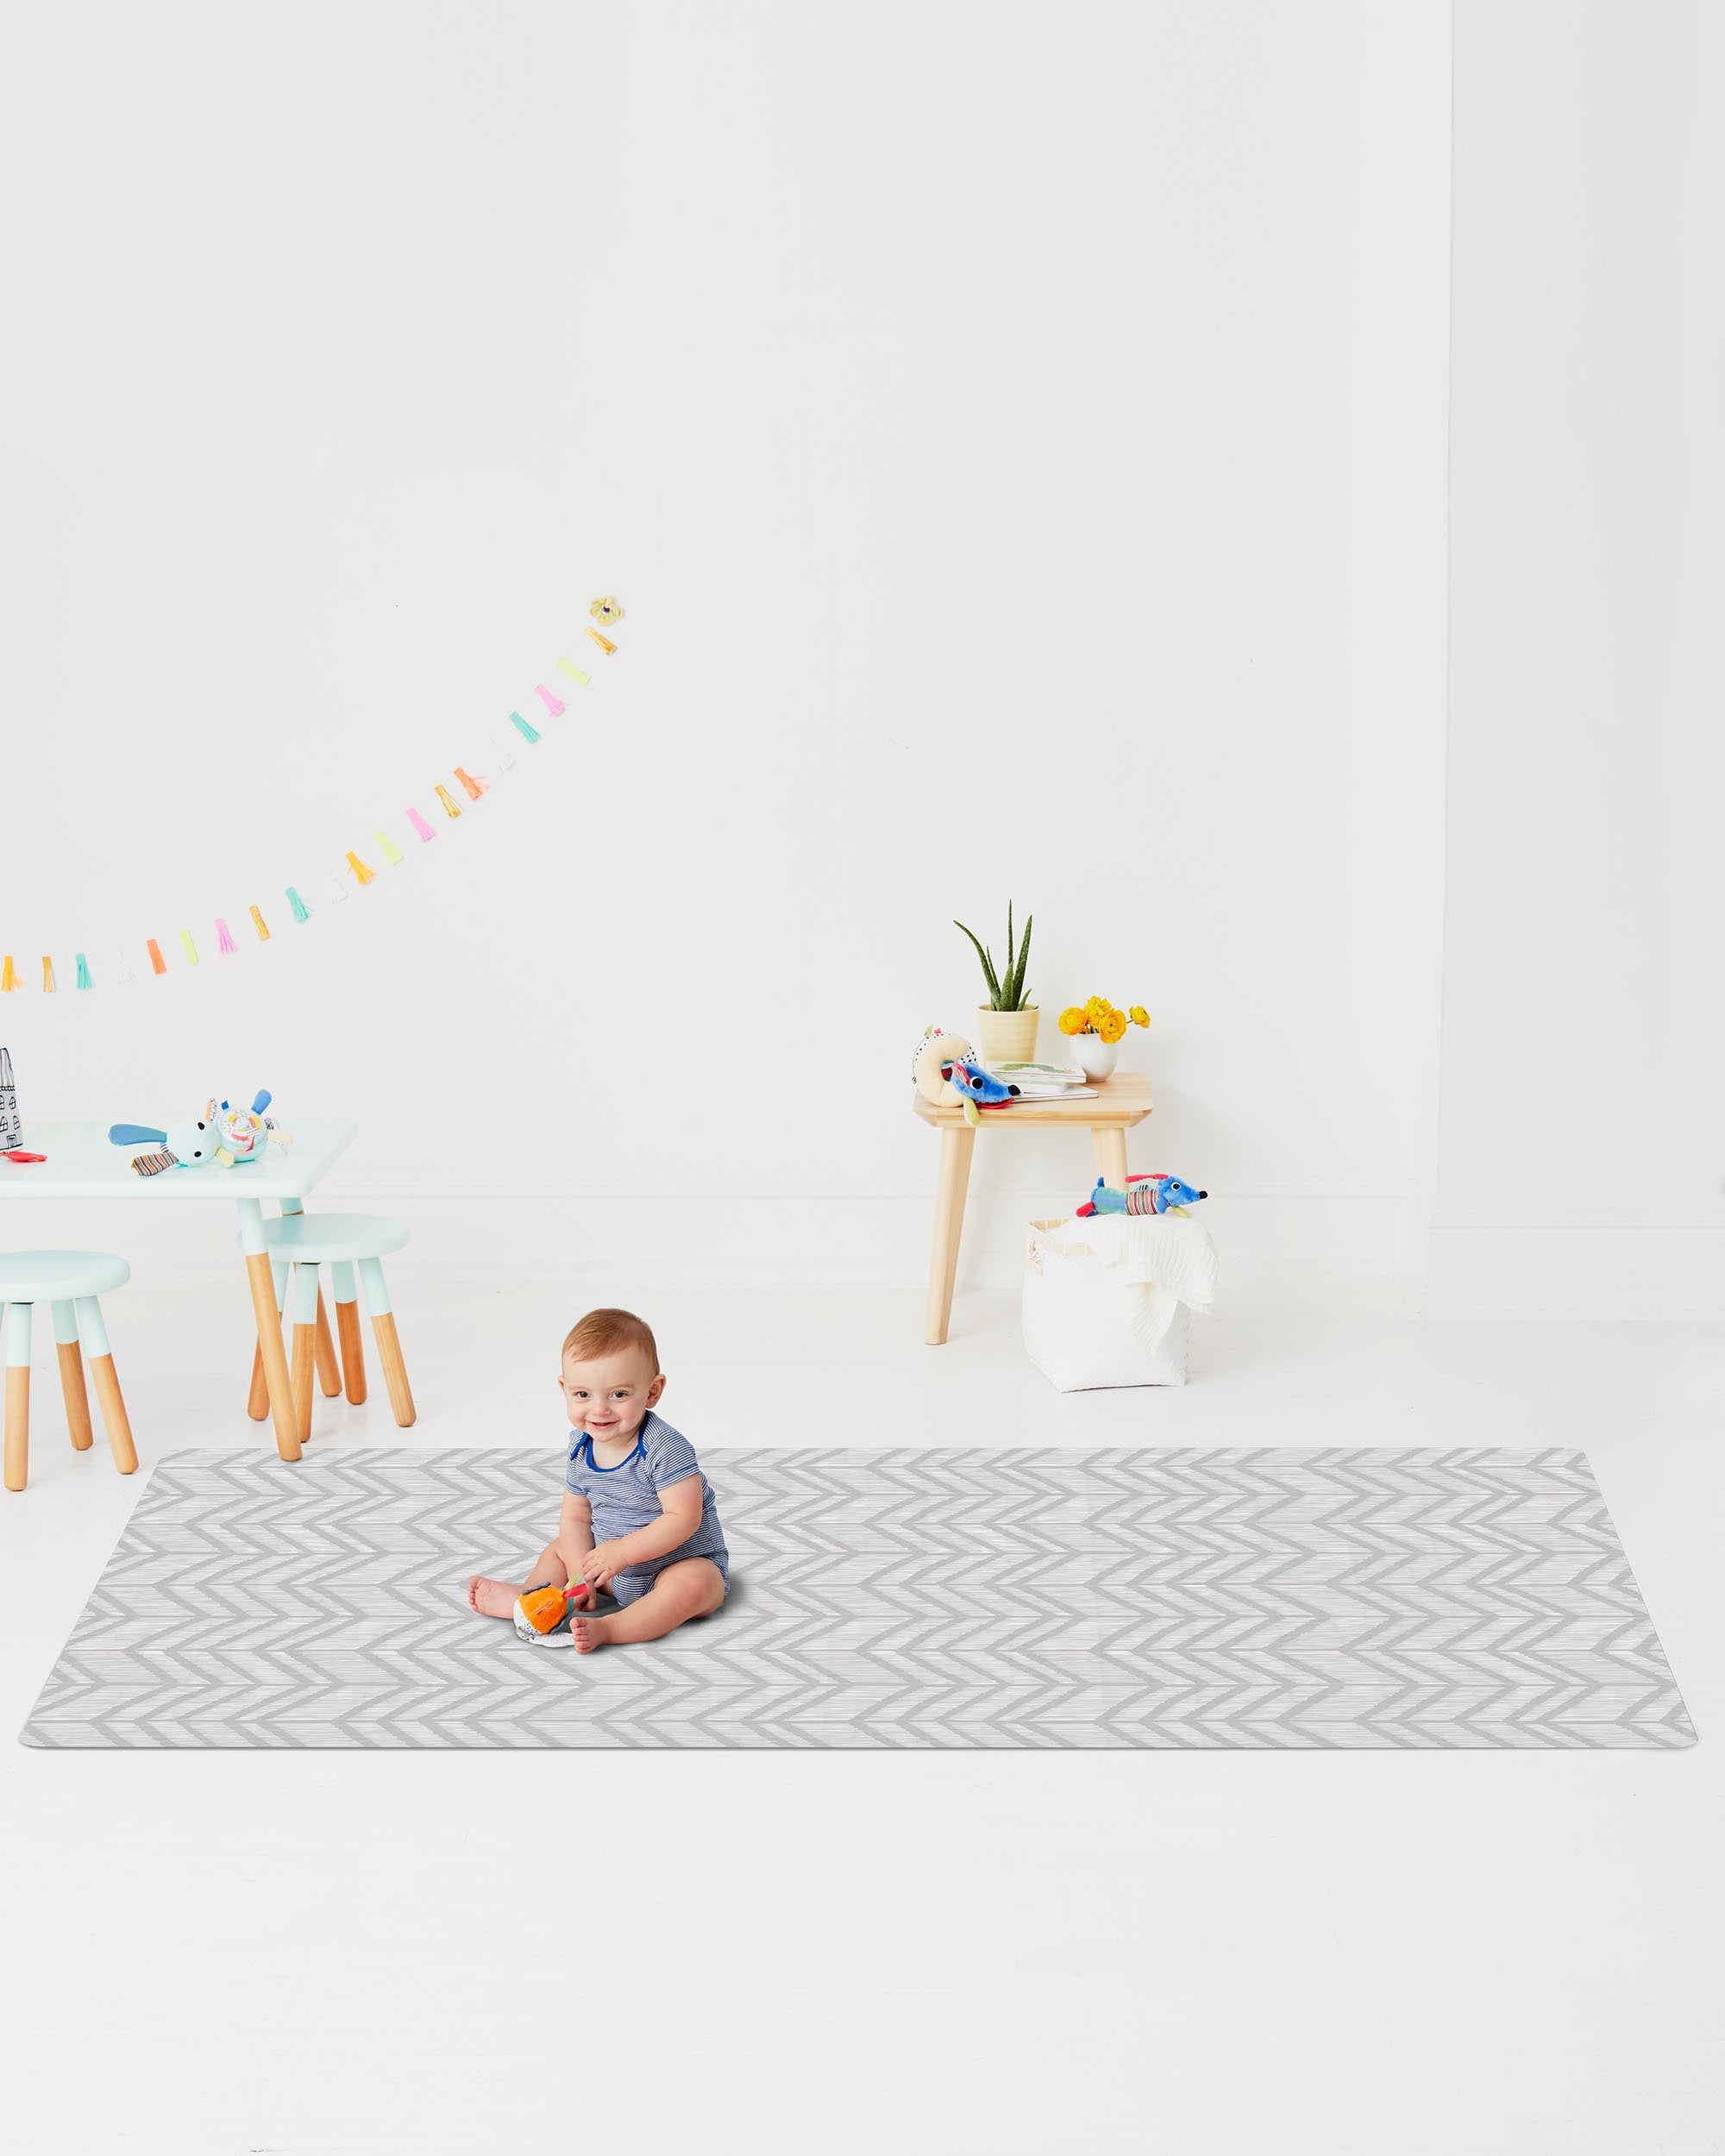 Toddler on the Skip Hop Doubleplay Reversible Playmat Little Travellers, chic decor side